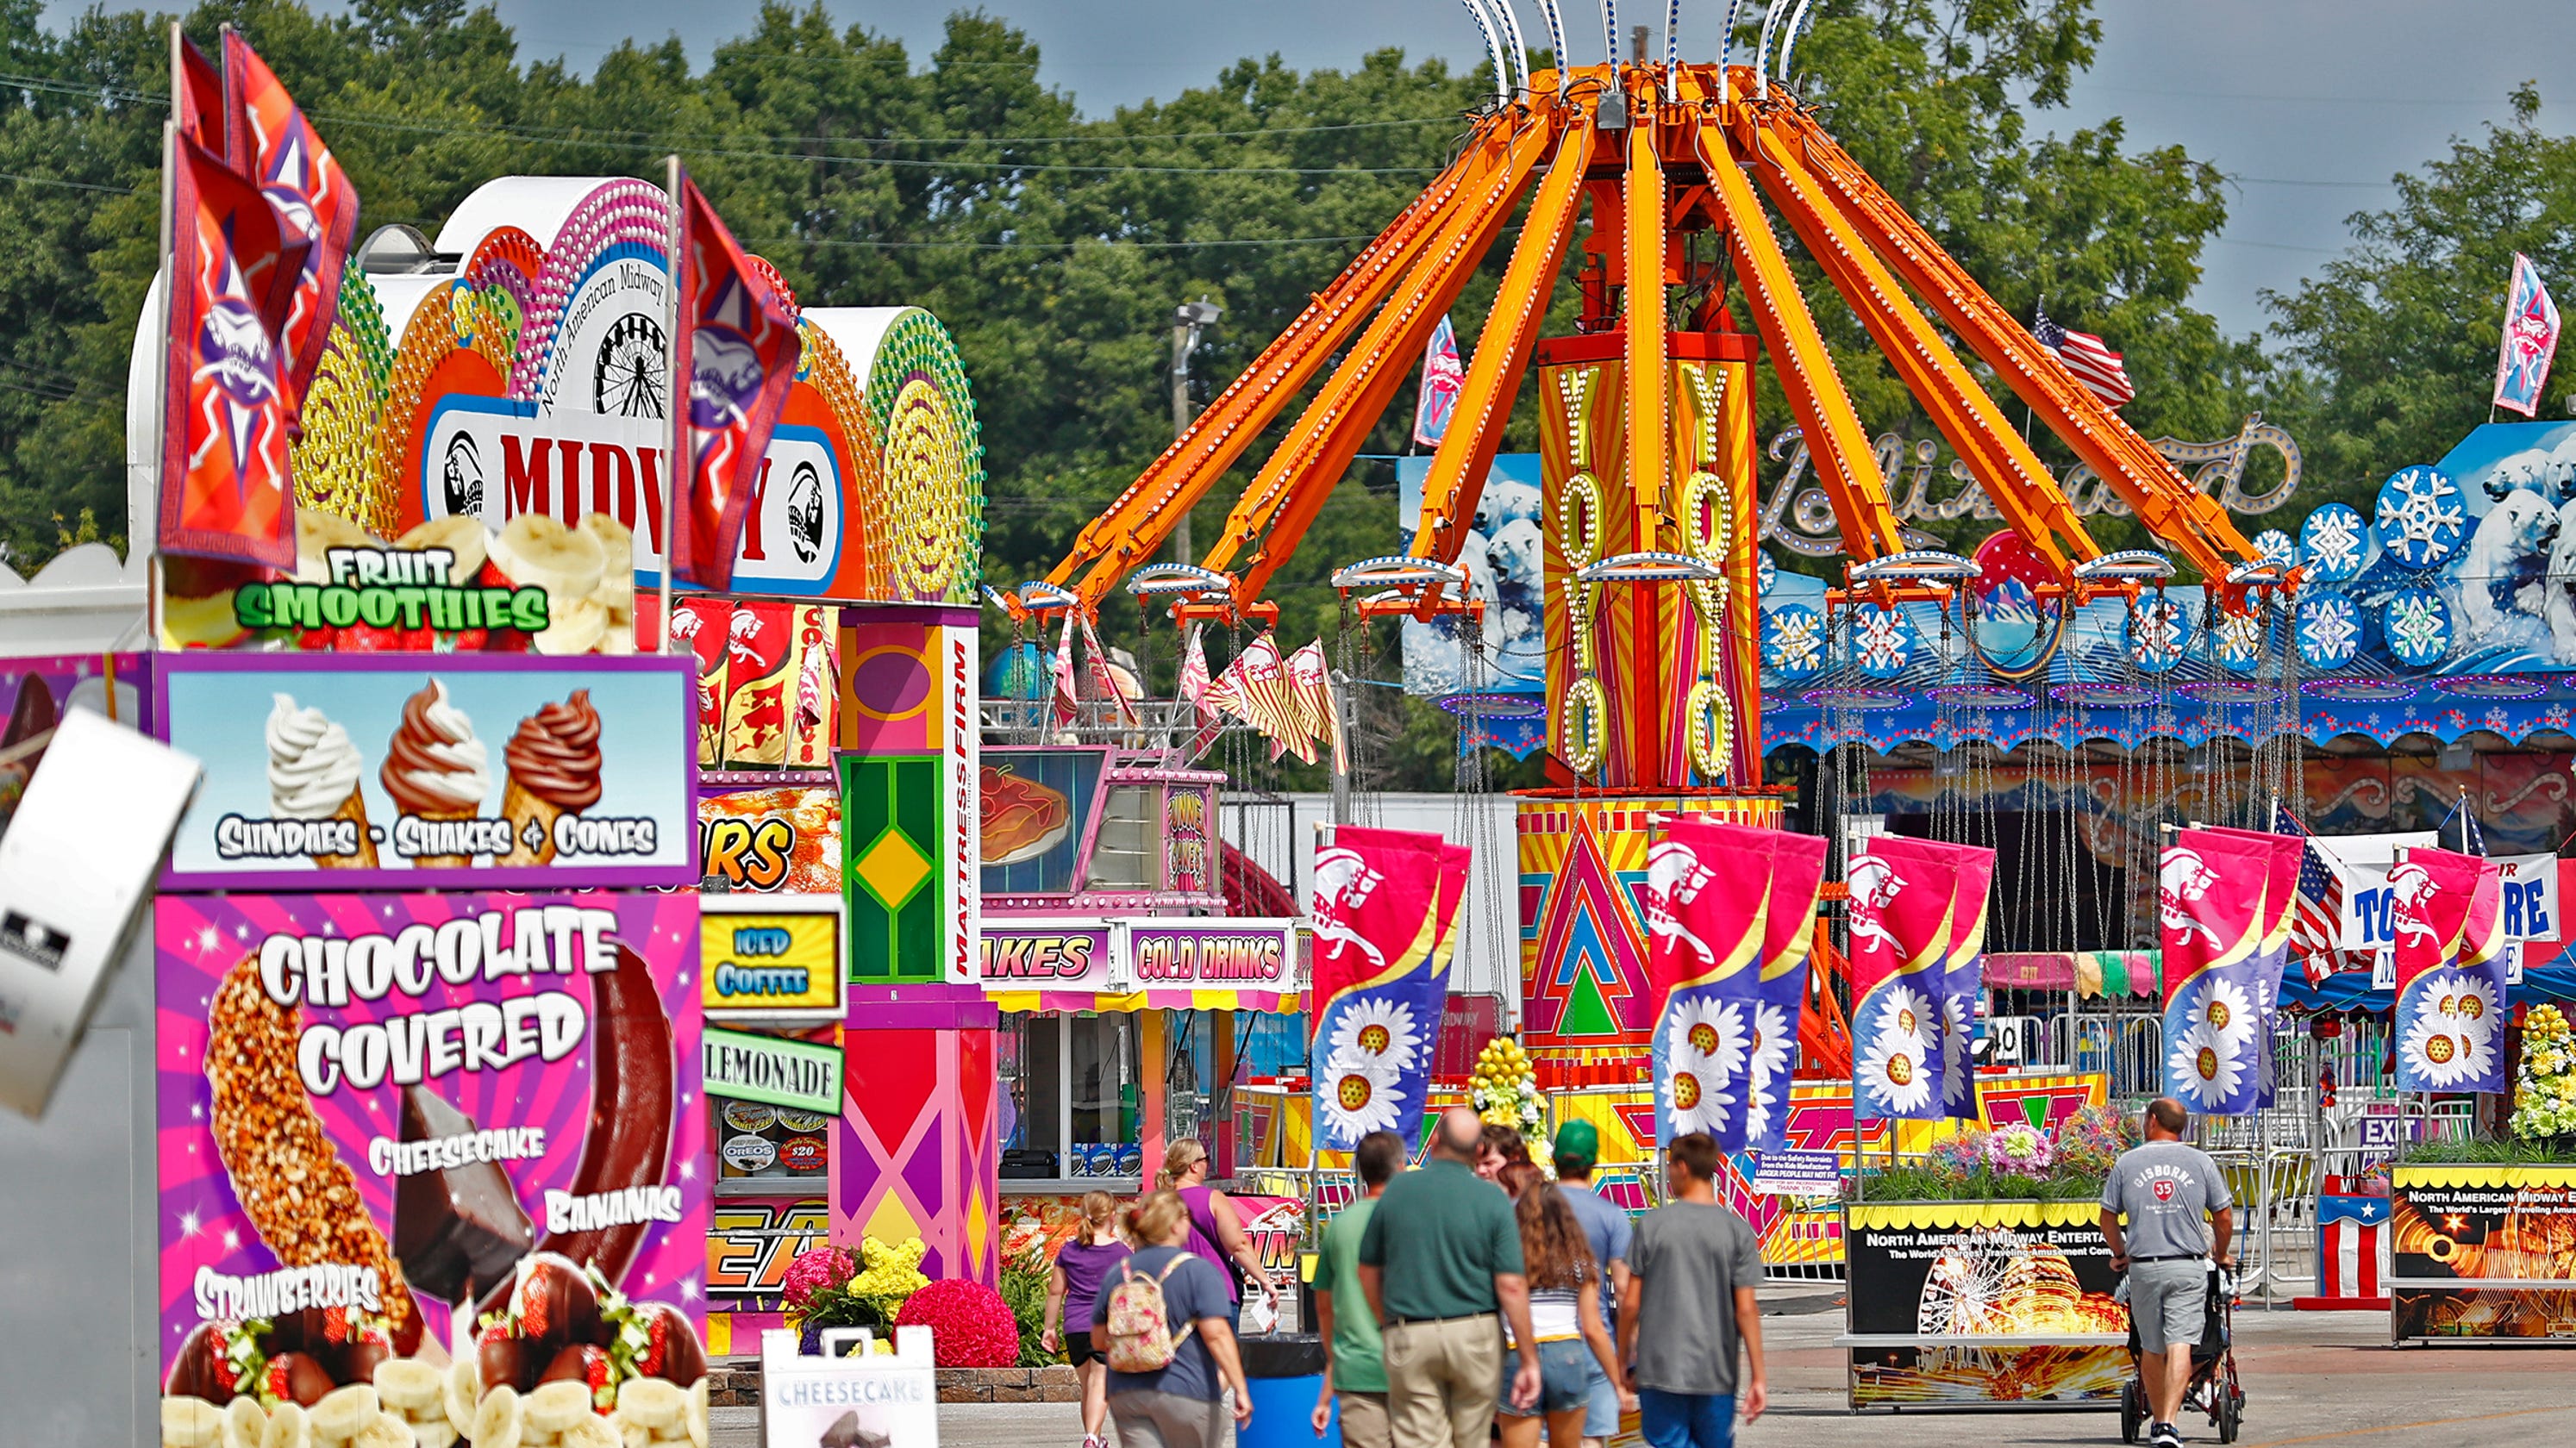 10 unexpected free things you can do at the 2018 Indiana State Fair